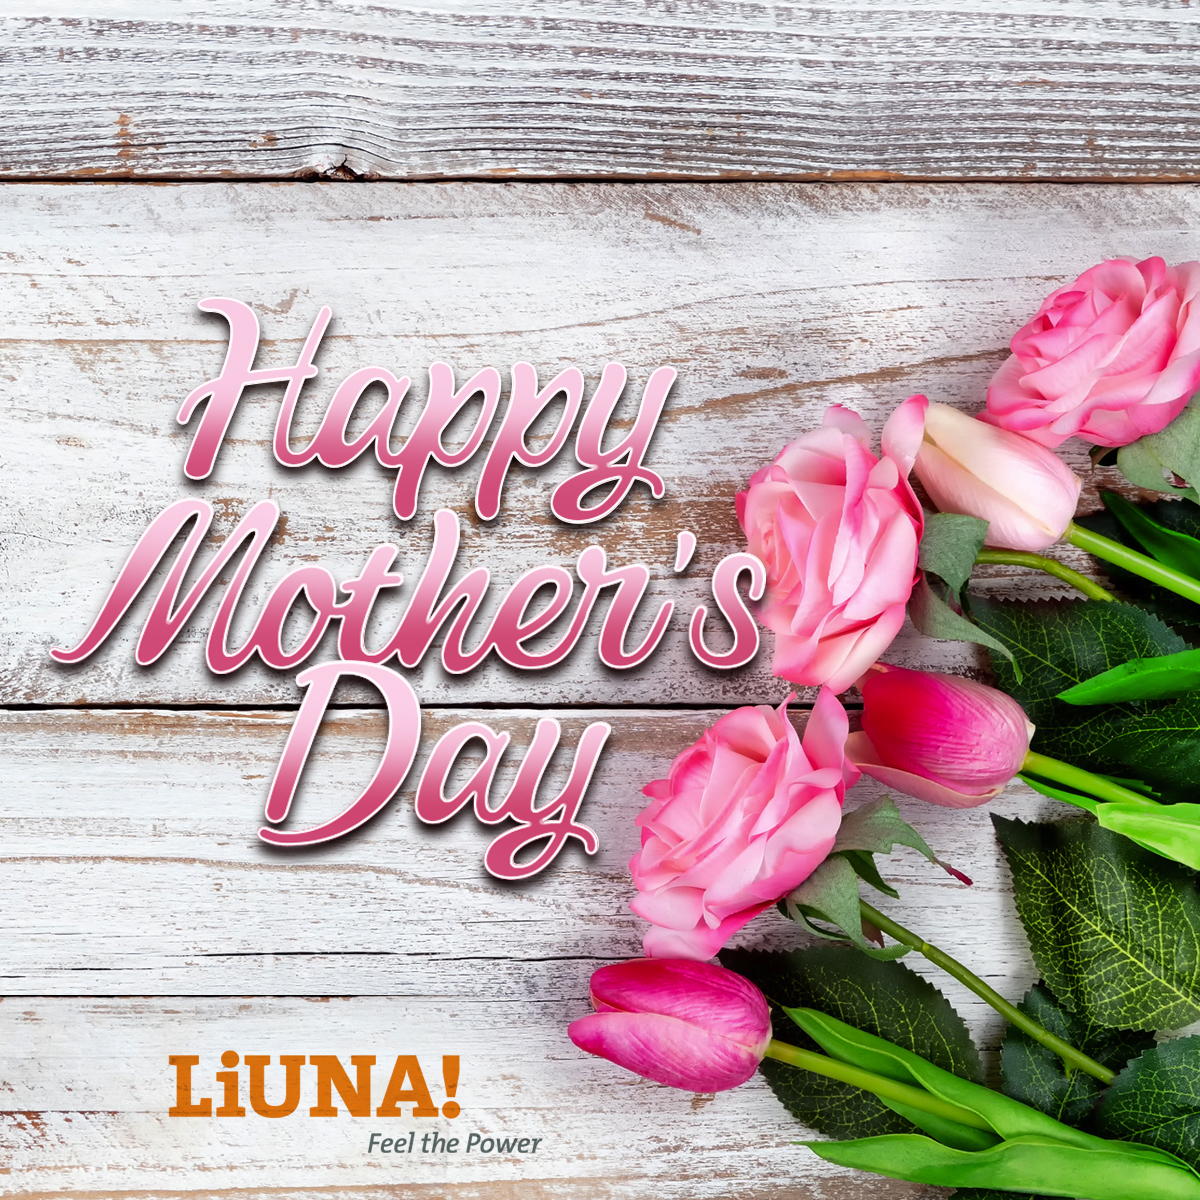 Wishing all moms everywhere a very Happy Mother's Day! We'd like to add an extra special shout out to our #Union sisters who are mothers!

We hope you enjoy your day.

#HappyMothersDay #MothersDay #MothersDay2024 #MD24 #Mom #Solidarity #Flowers #UnionProud #UnionMade #LIUNA